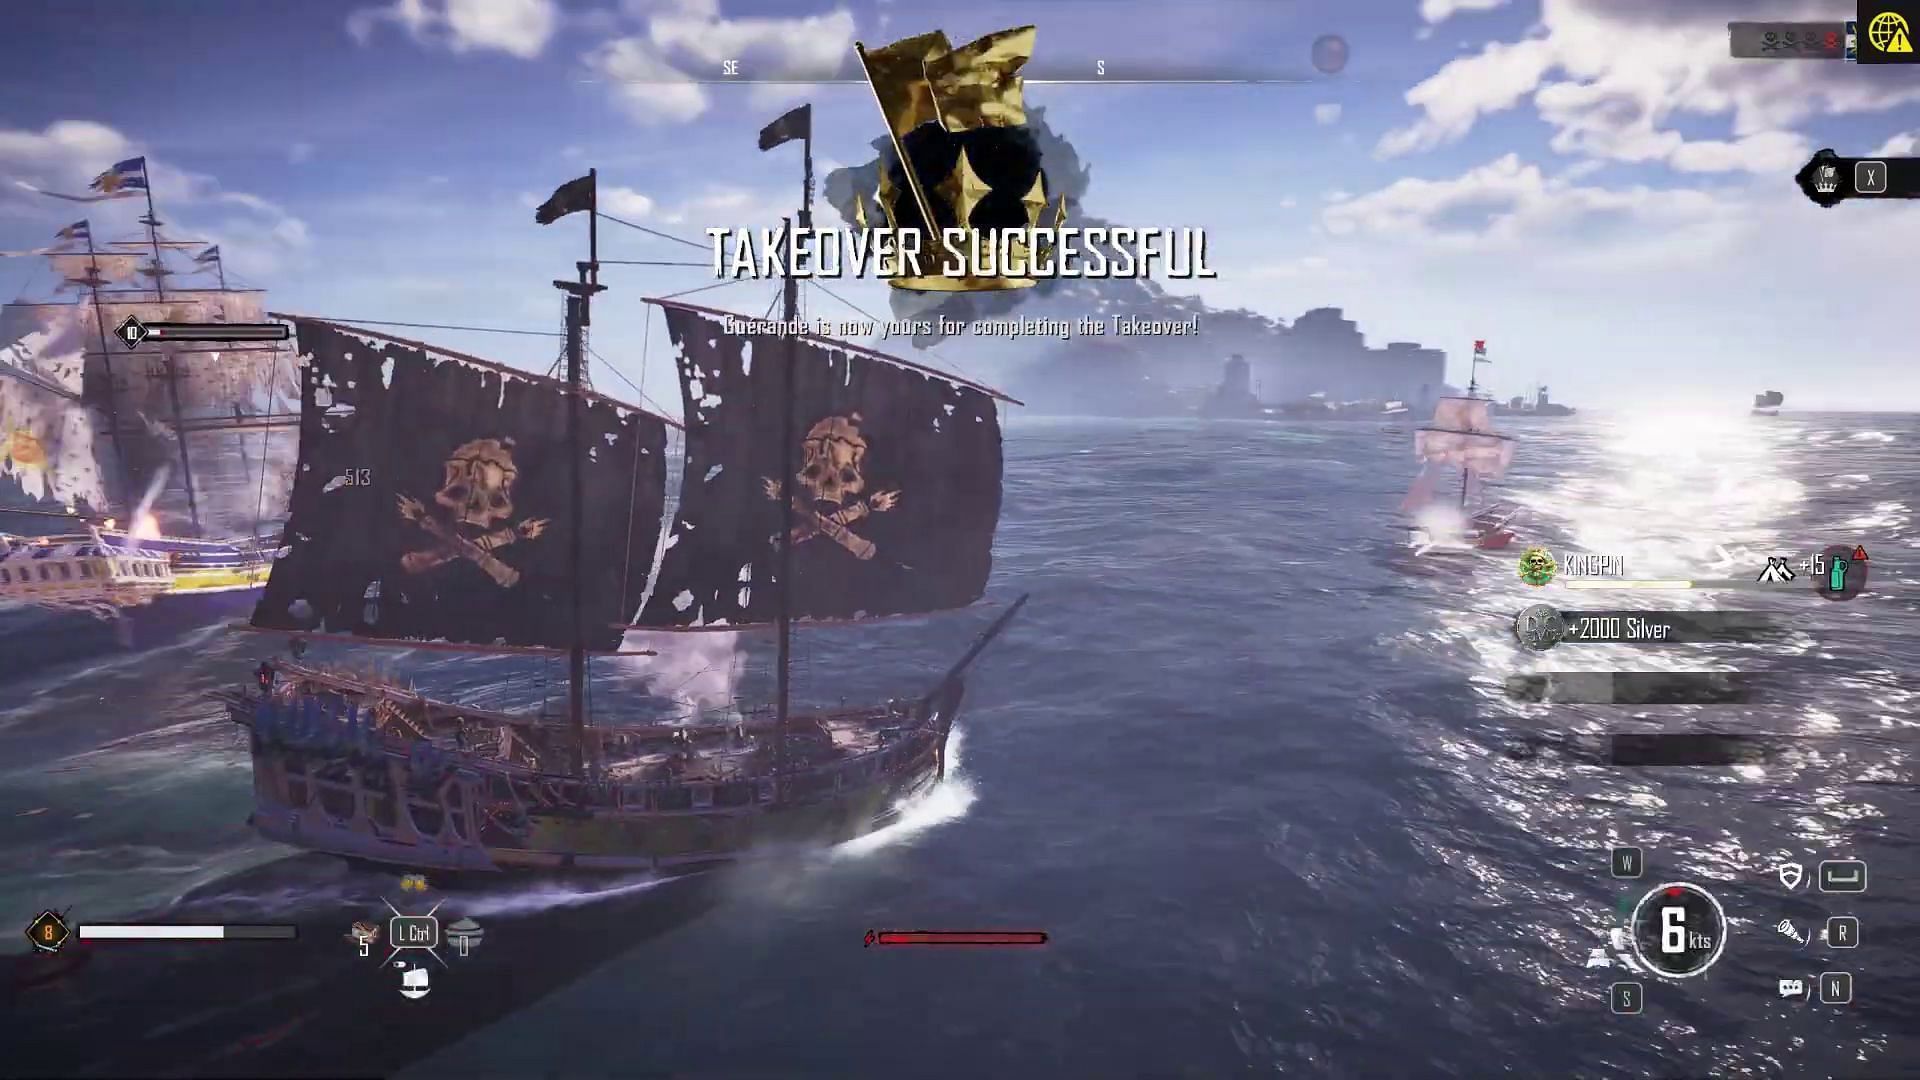 A successful takeover in Skull and Bones (Image via Ubisoft/YouTube-Game Trailers &amp; Guides)